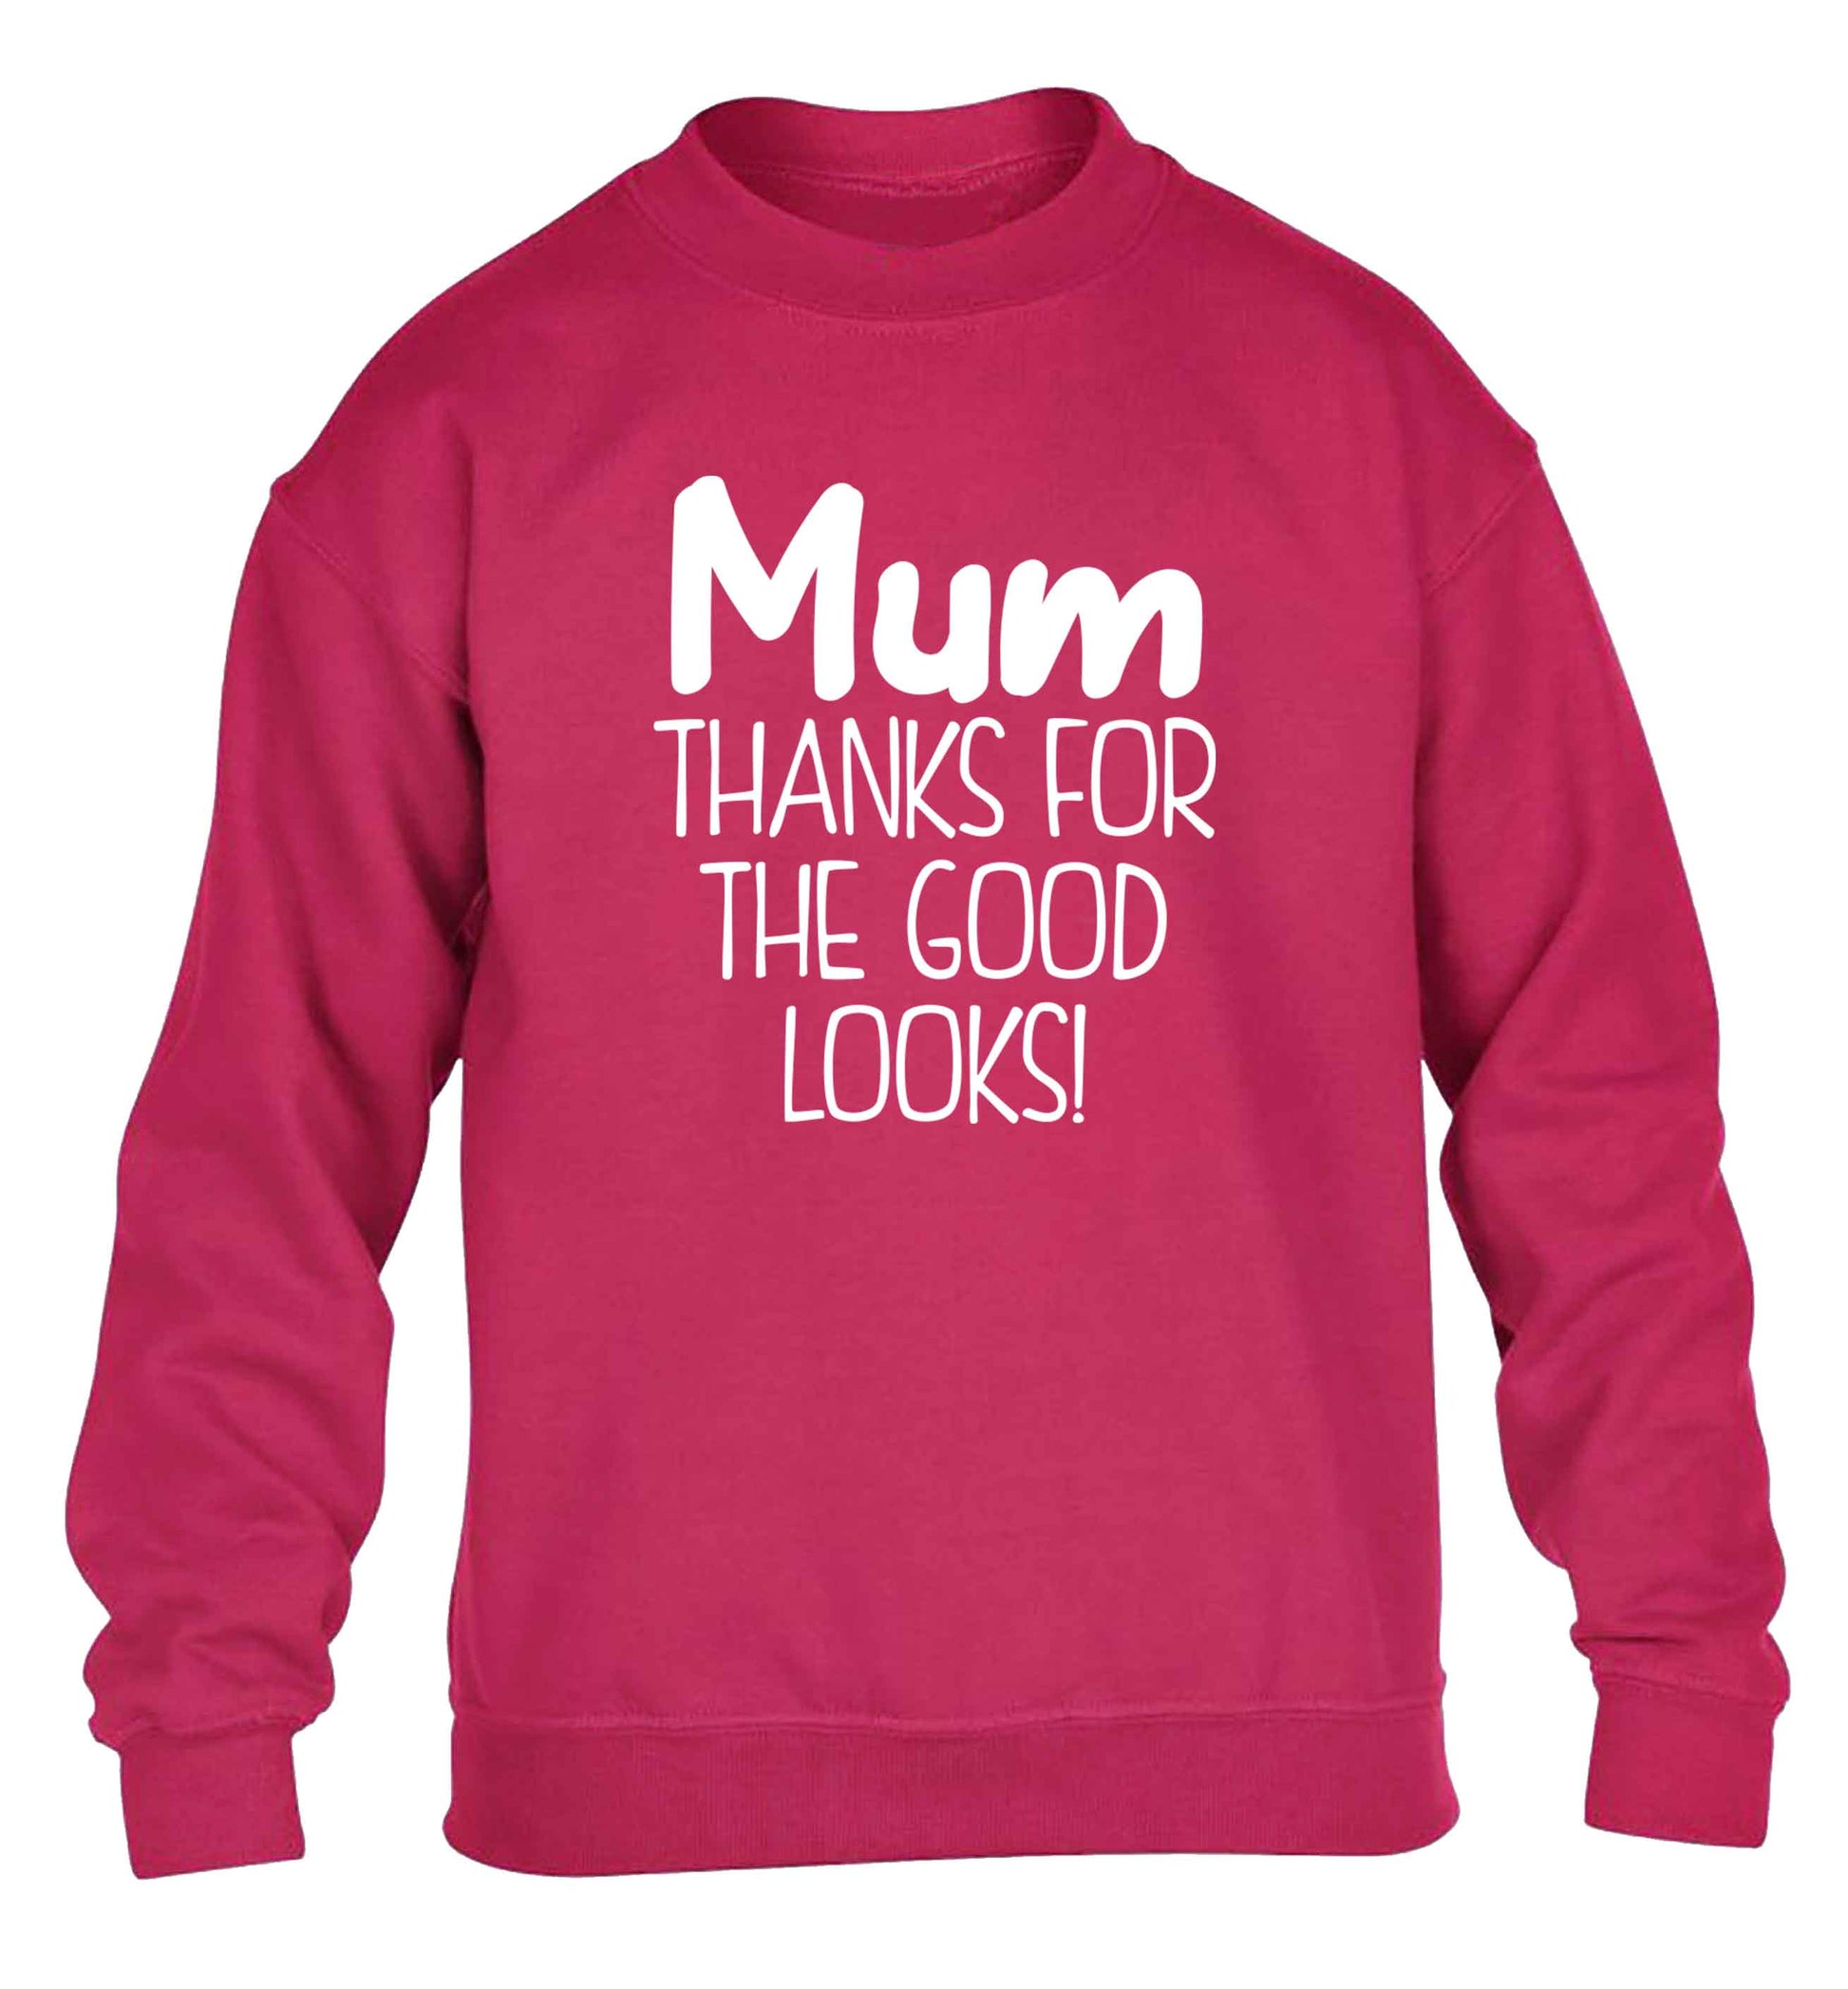 Mum thanks for the good looks! children's pink sweater 12-13 Years